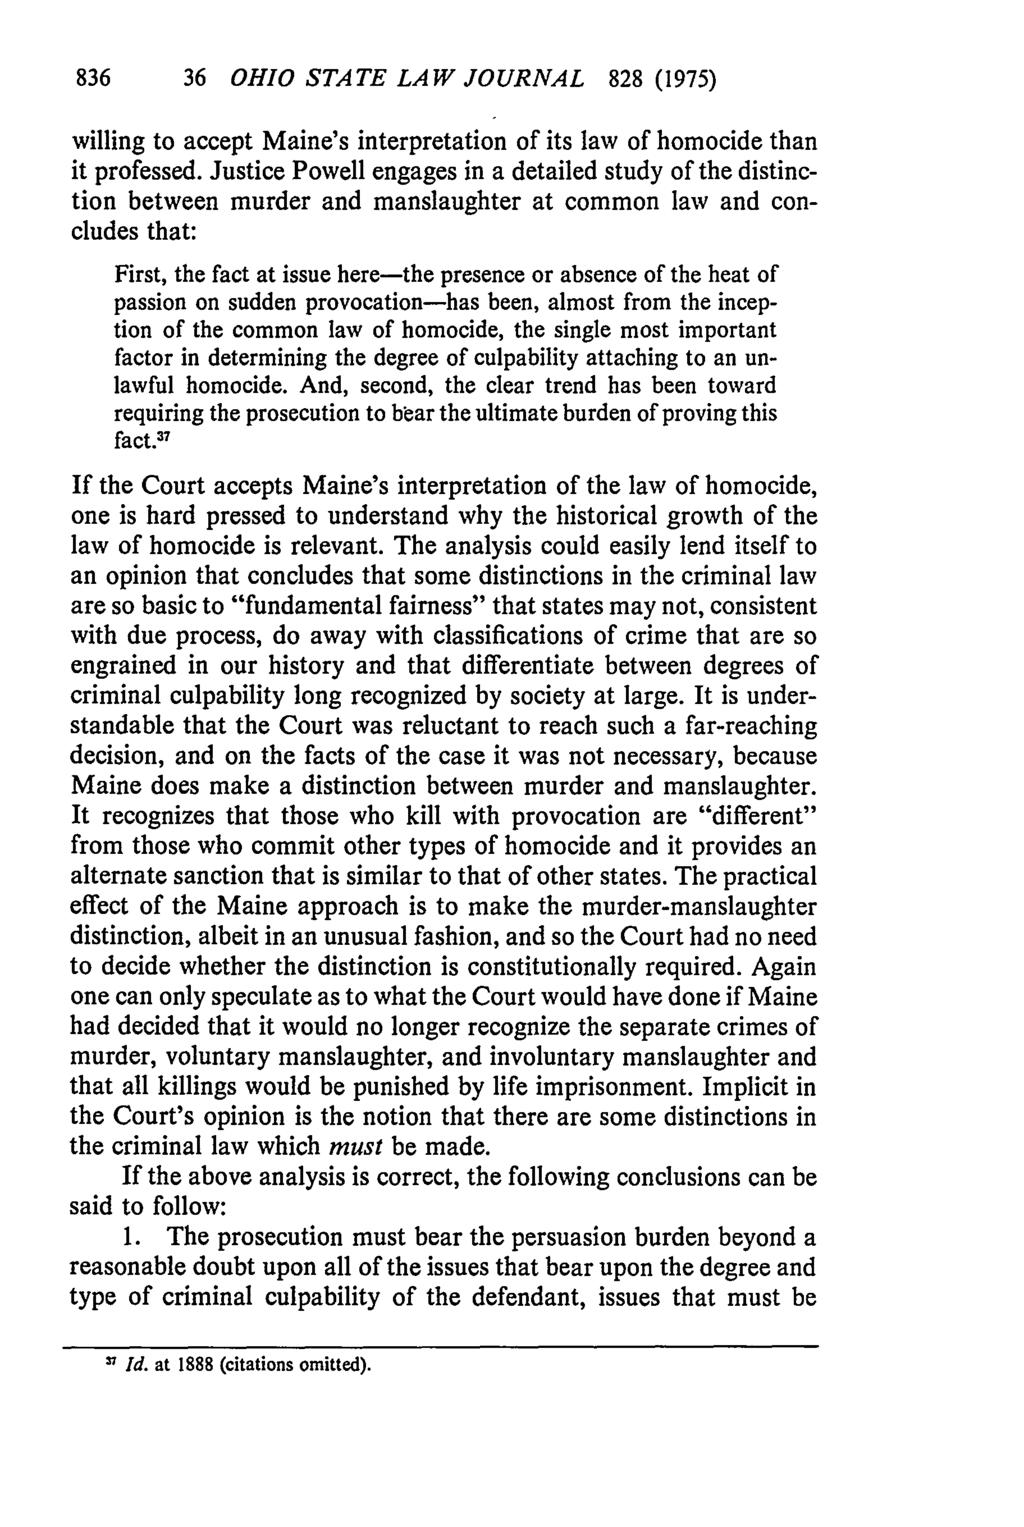 36 OHIO STATE LAW JOURNAL 828 (1975) willing to accept Maine's interpretation of its law of homocide than it professed.